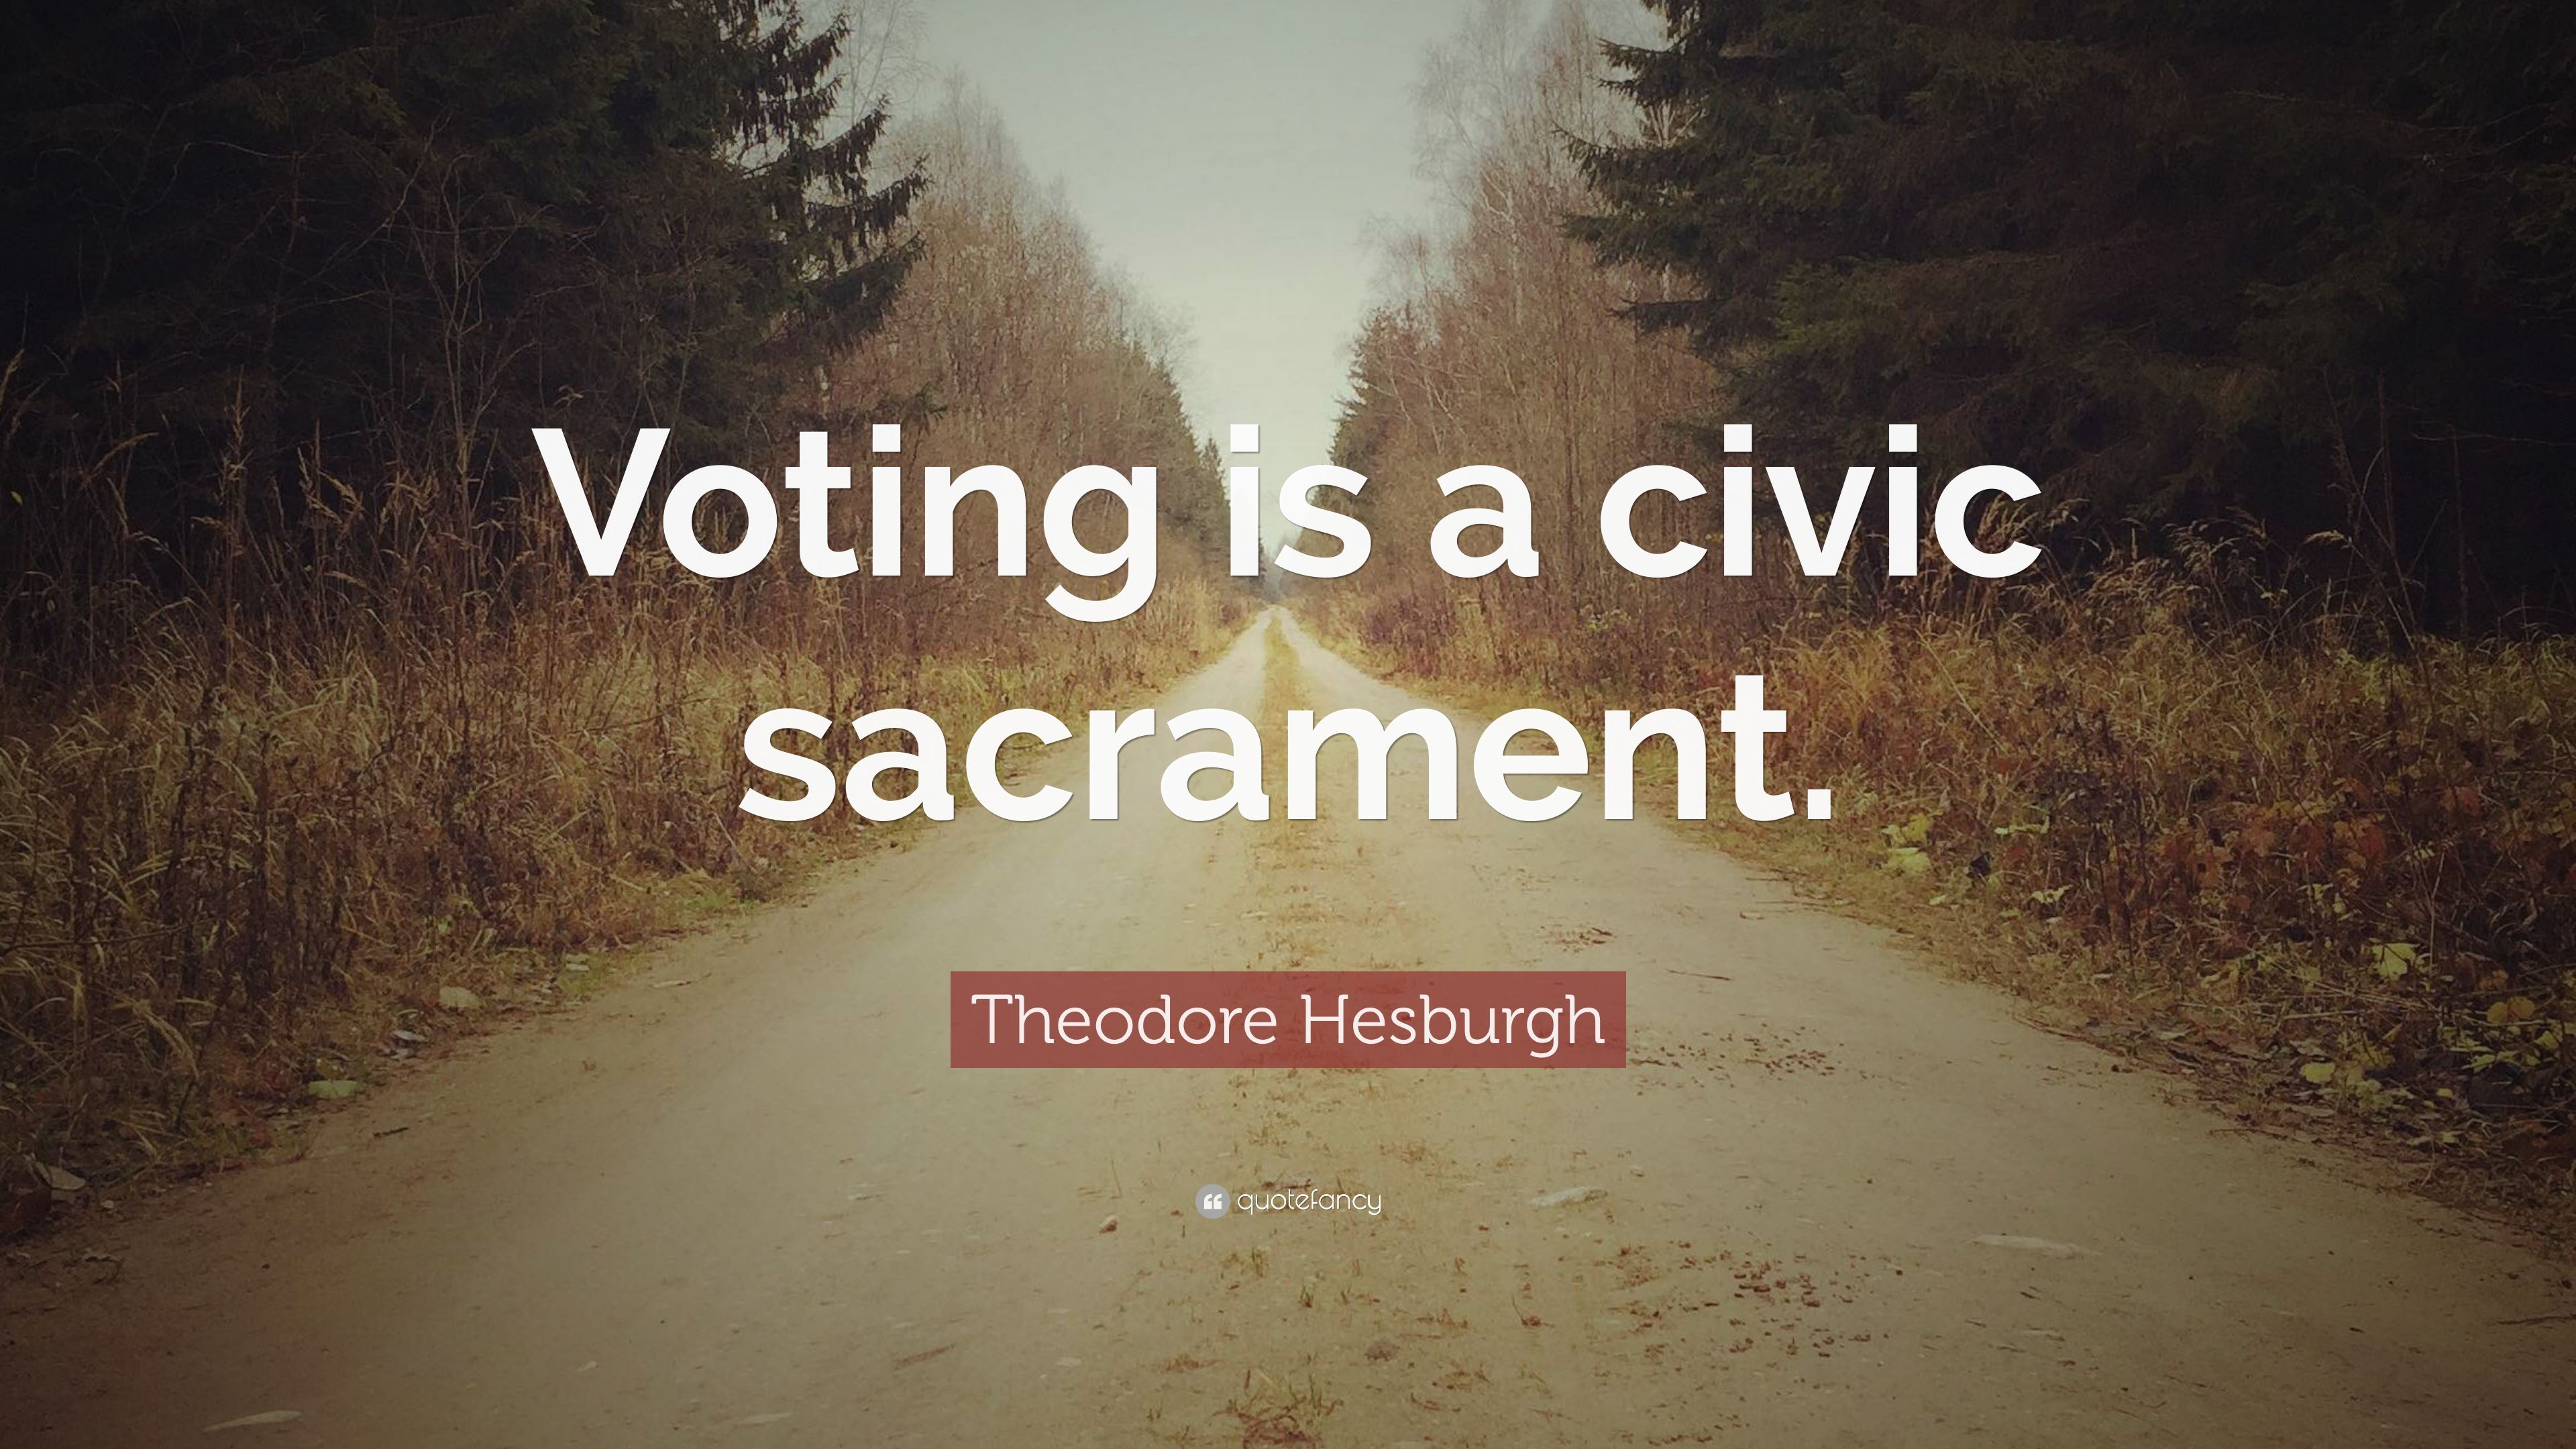 Theodore Hesburgh Quote: “Voting is a civic sacrament.” (9 wallpaper)